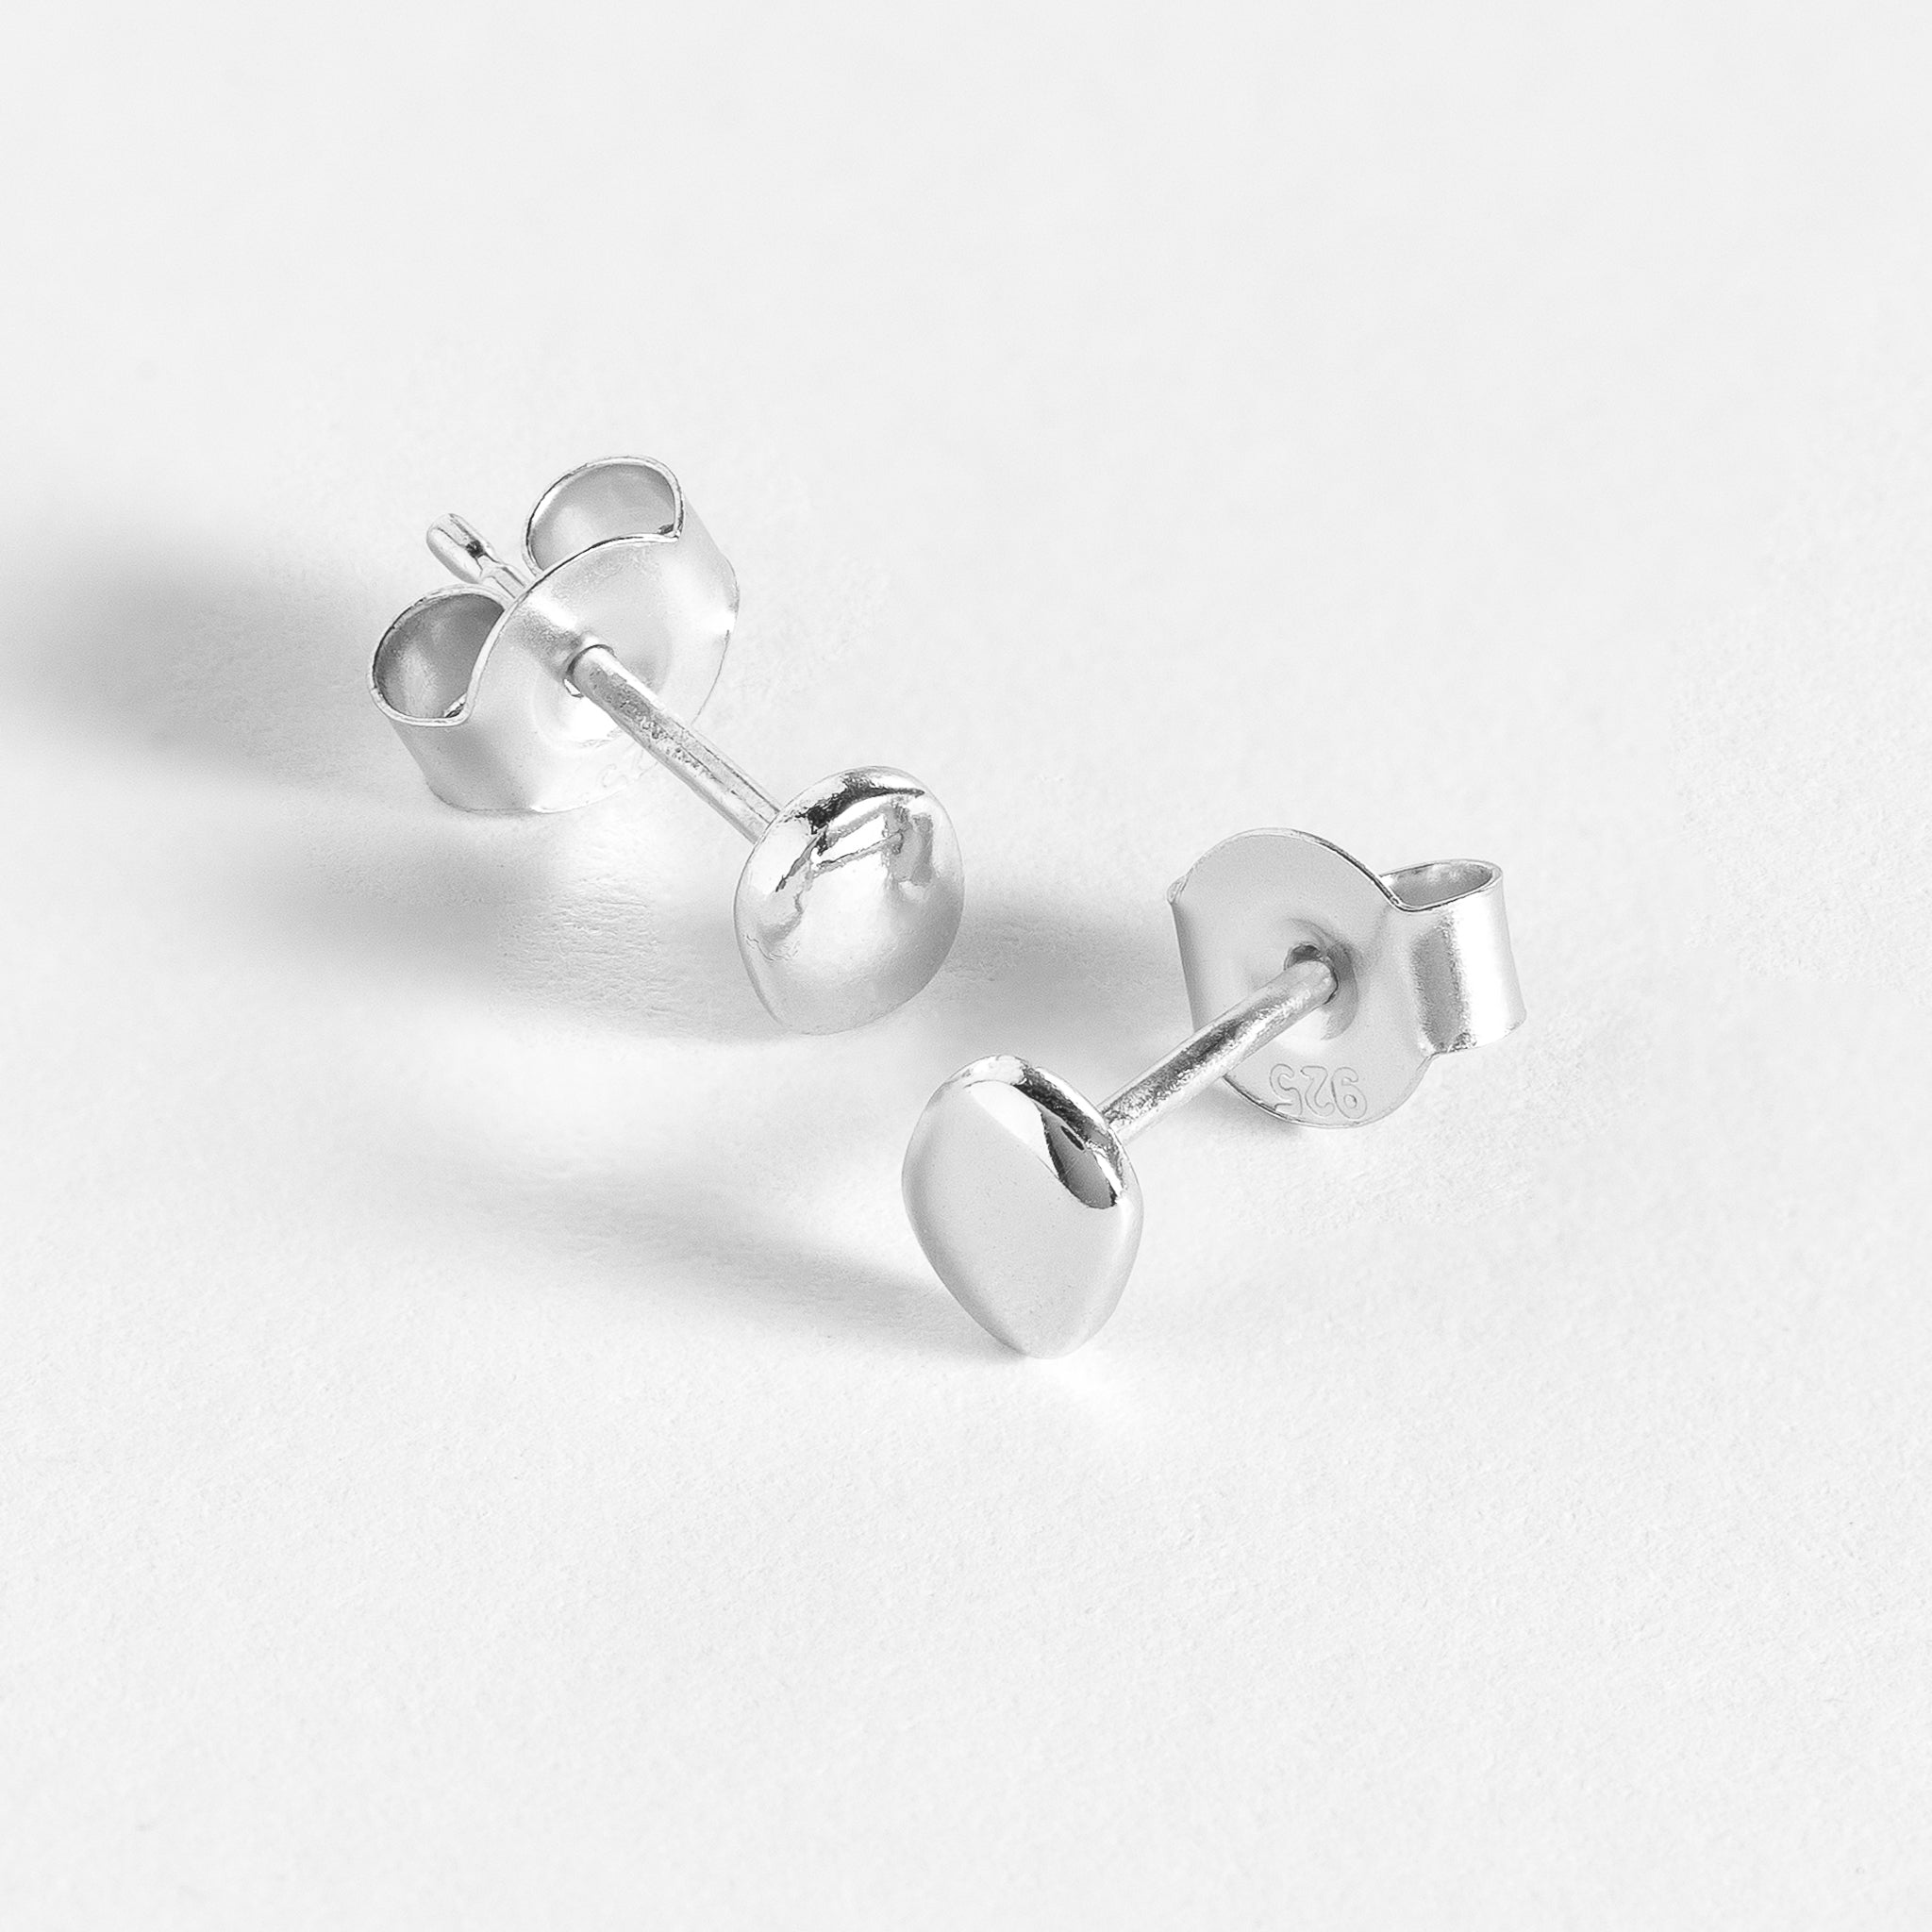 Stud features a handcut natural pebble shape and is crafted from sterling silver or 18ct gold vermeil.